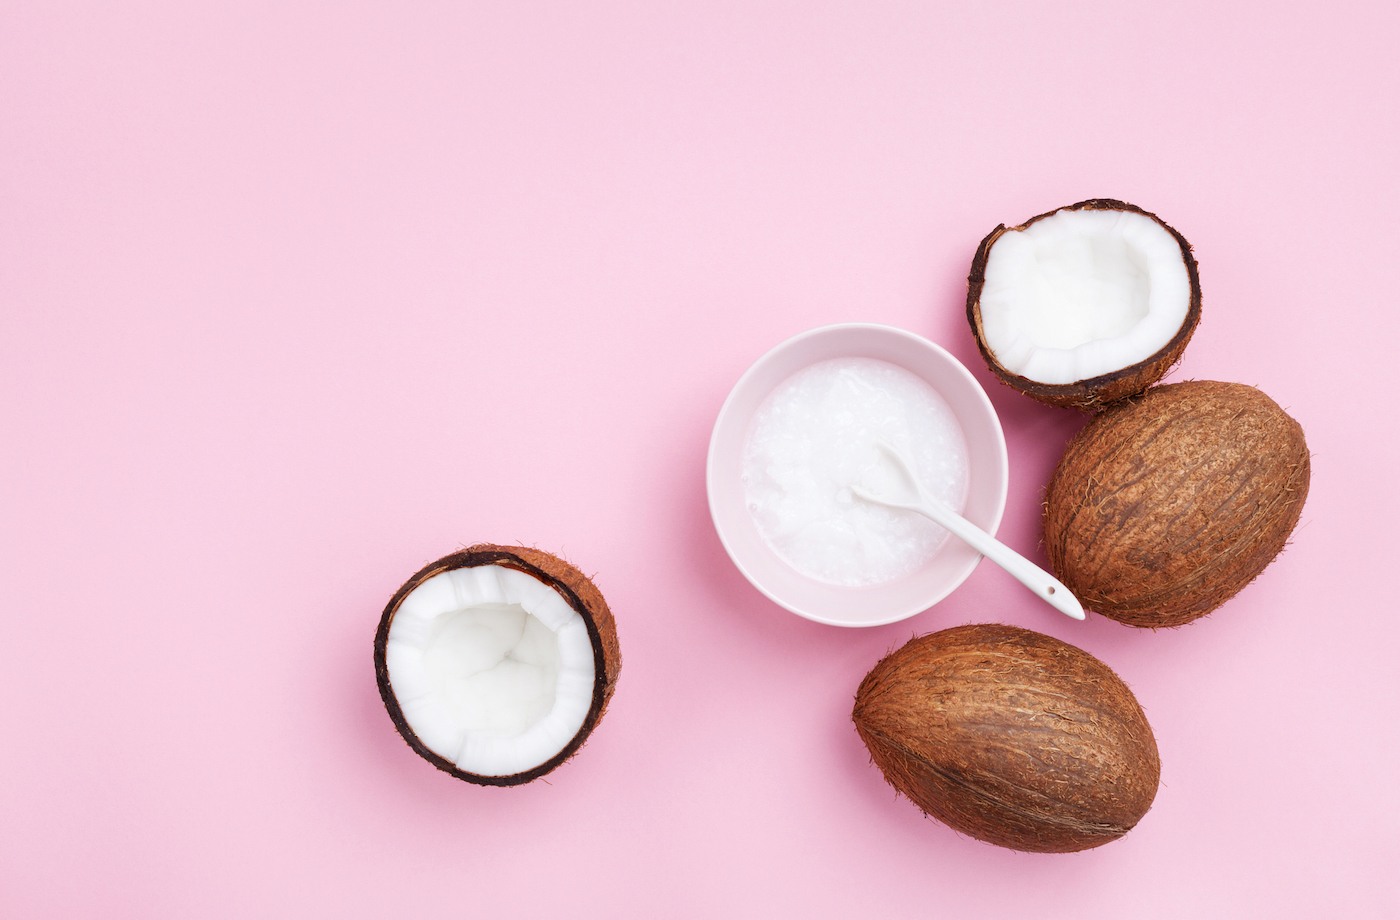 MCT oil vs coconut oil: Are they good for you? | Well+Good